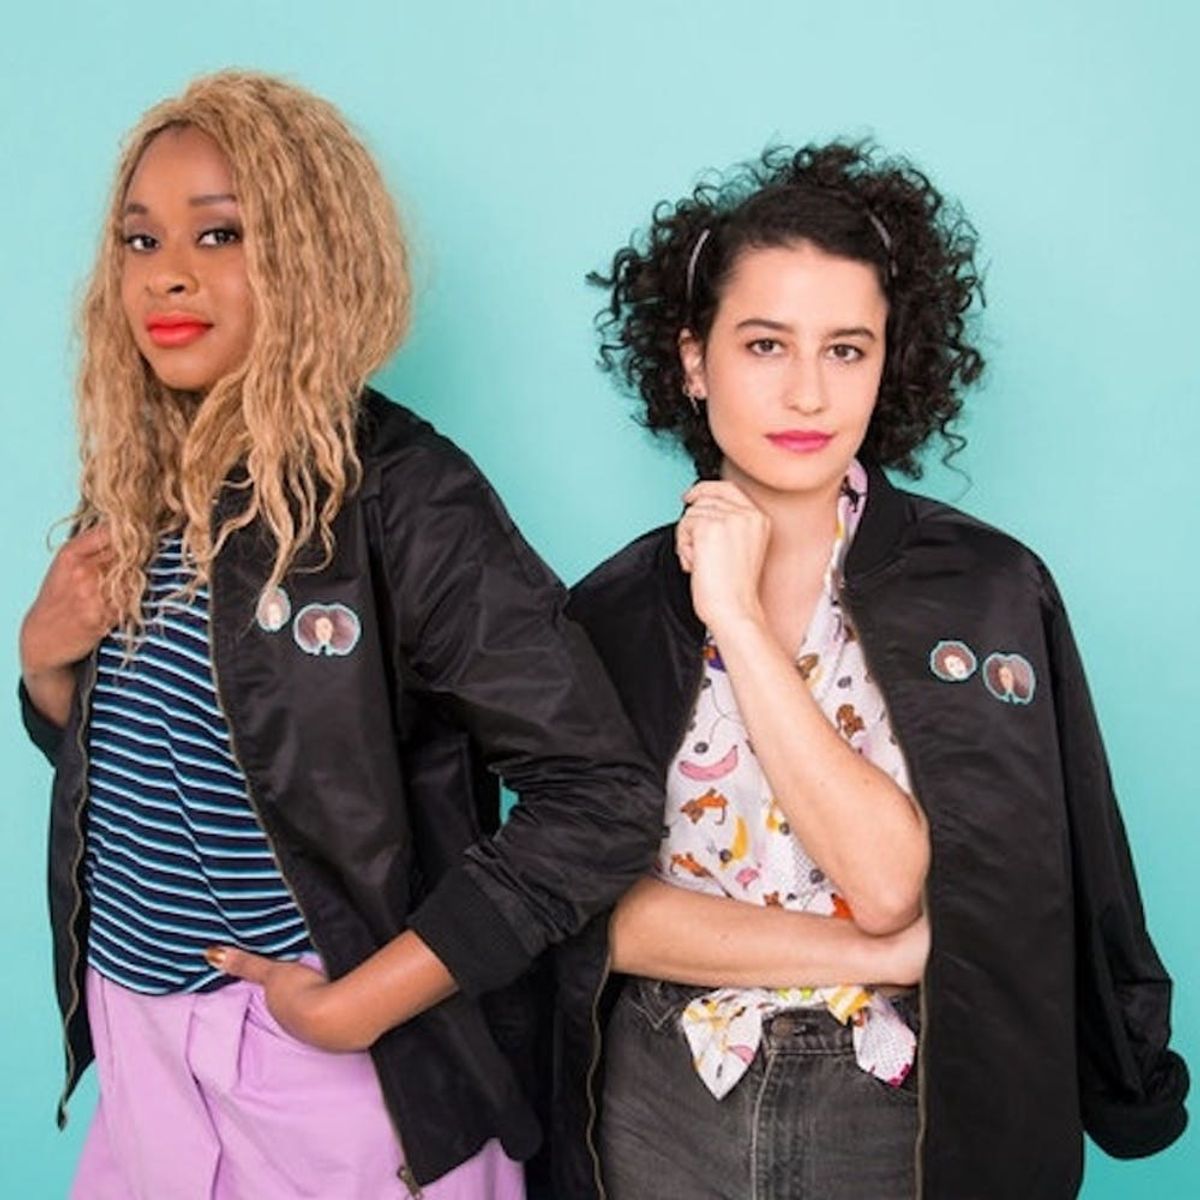 Ilana Glazer and Phoebe Robinson’s Fashion Collab Will Have You Screaming “Yaaas Queen”